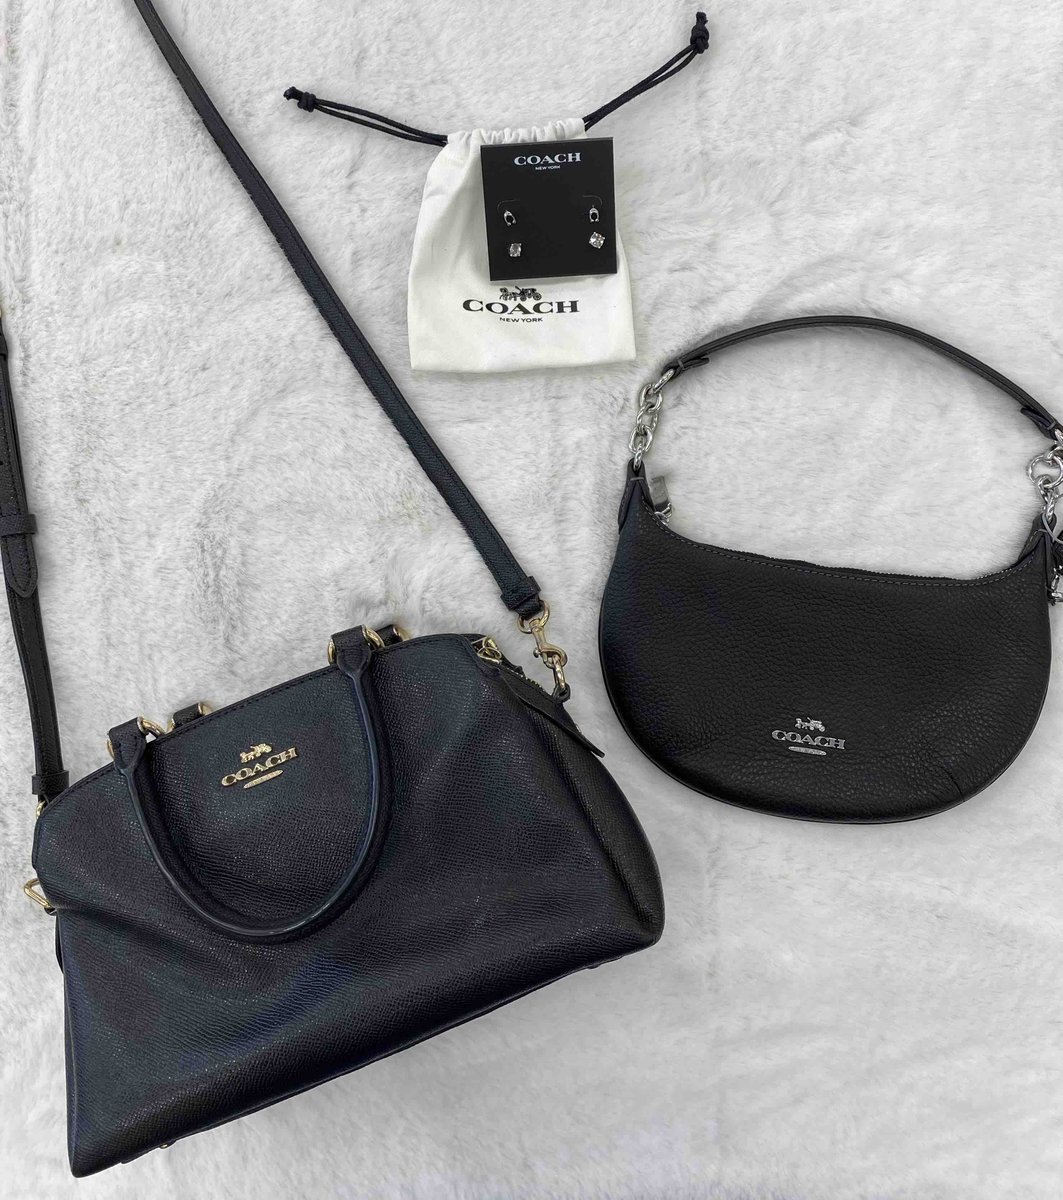 Look how cute these high end items are🤍

🏷️ left purse: $60
🏷️ earrings: $12
🏷️ right purse: $40

#gentlyused #platosclosetcedarfalls #trendystyles #shopwithus #sellwithus #recycleyourstyle #trendsforless #cedarfalls #iowa #platoscloset